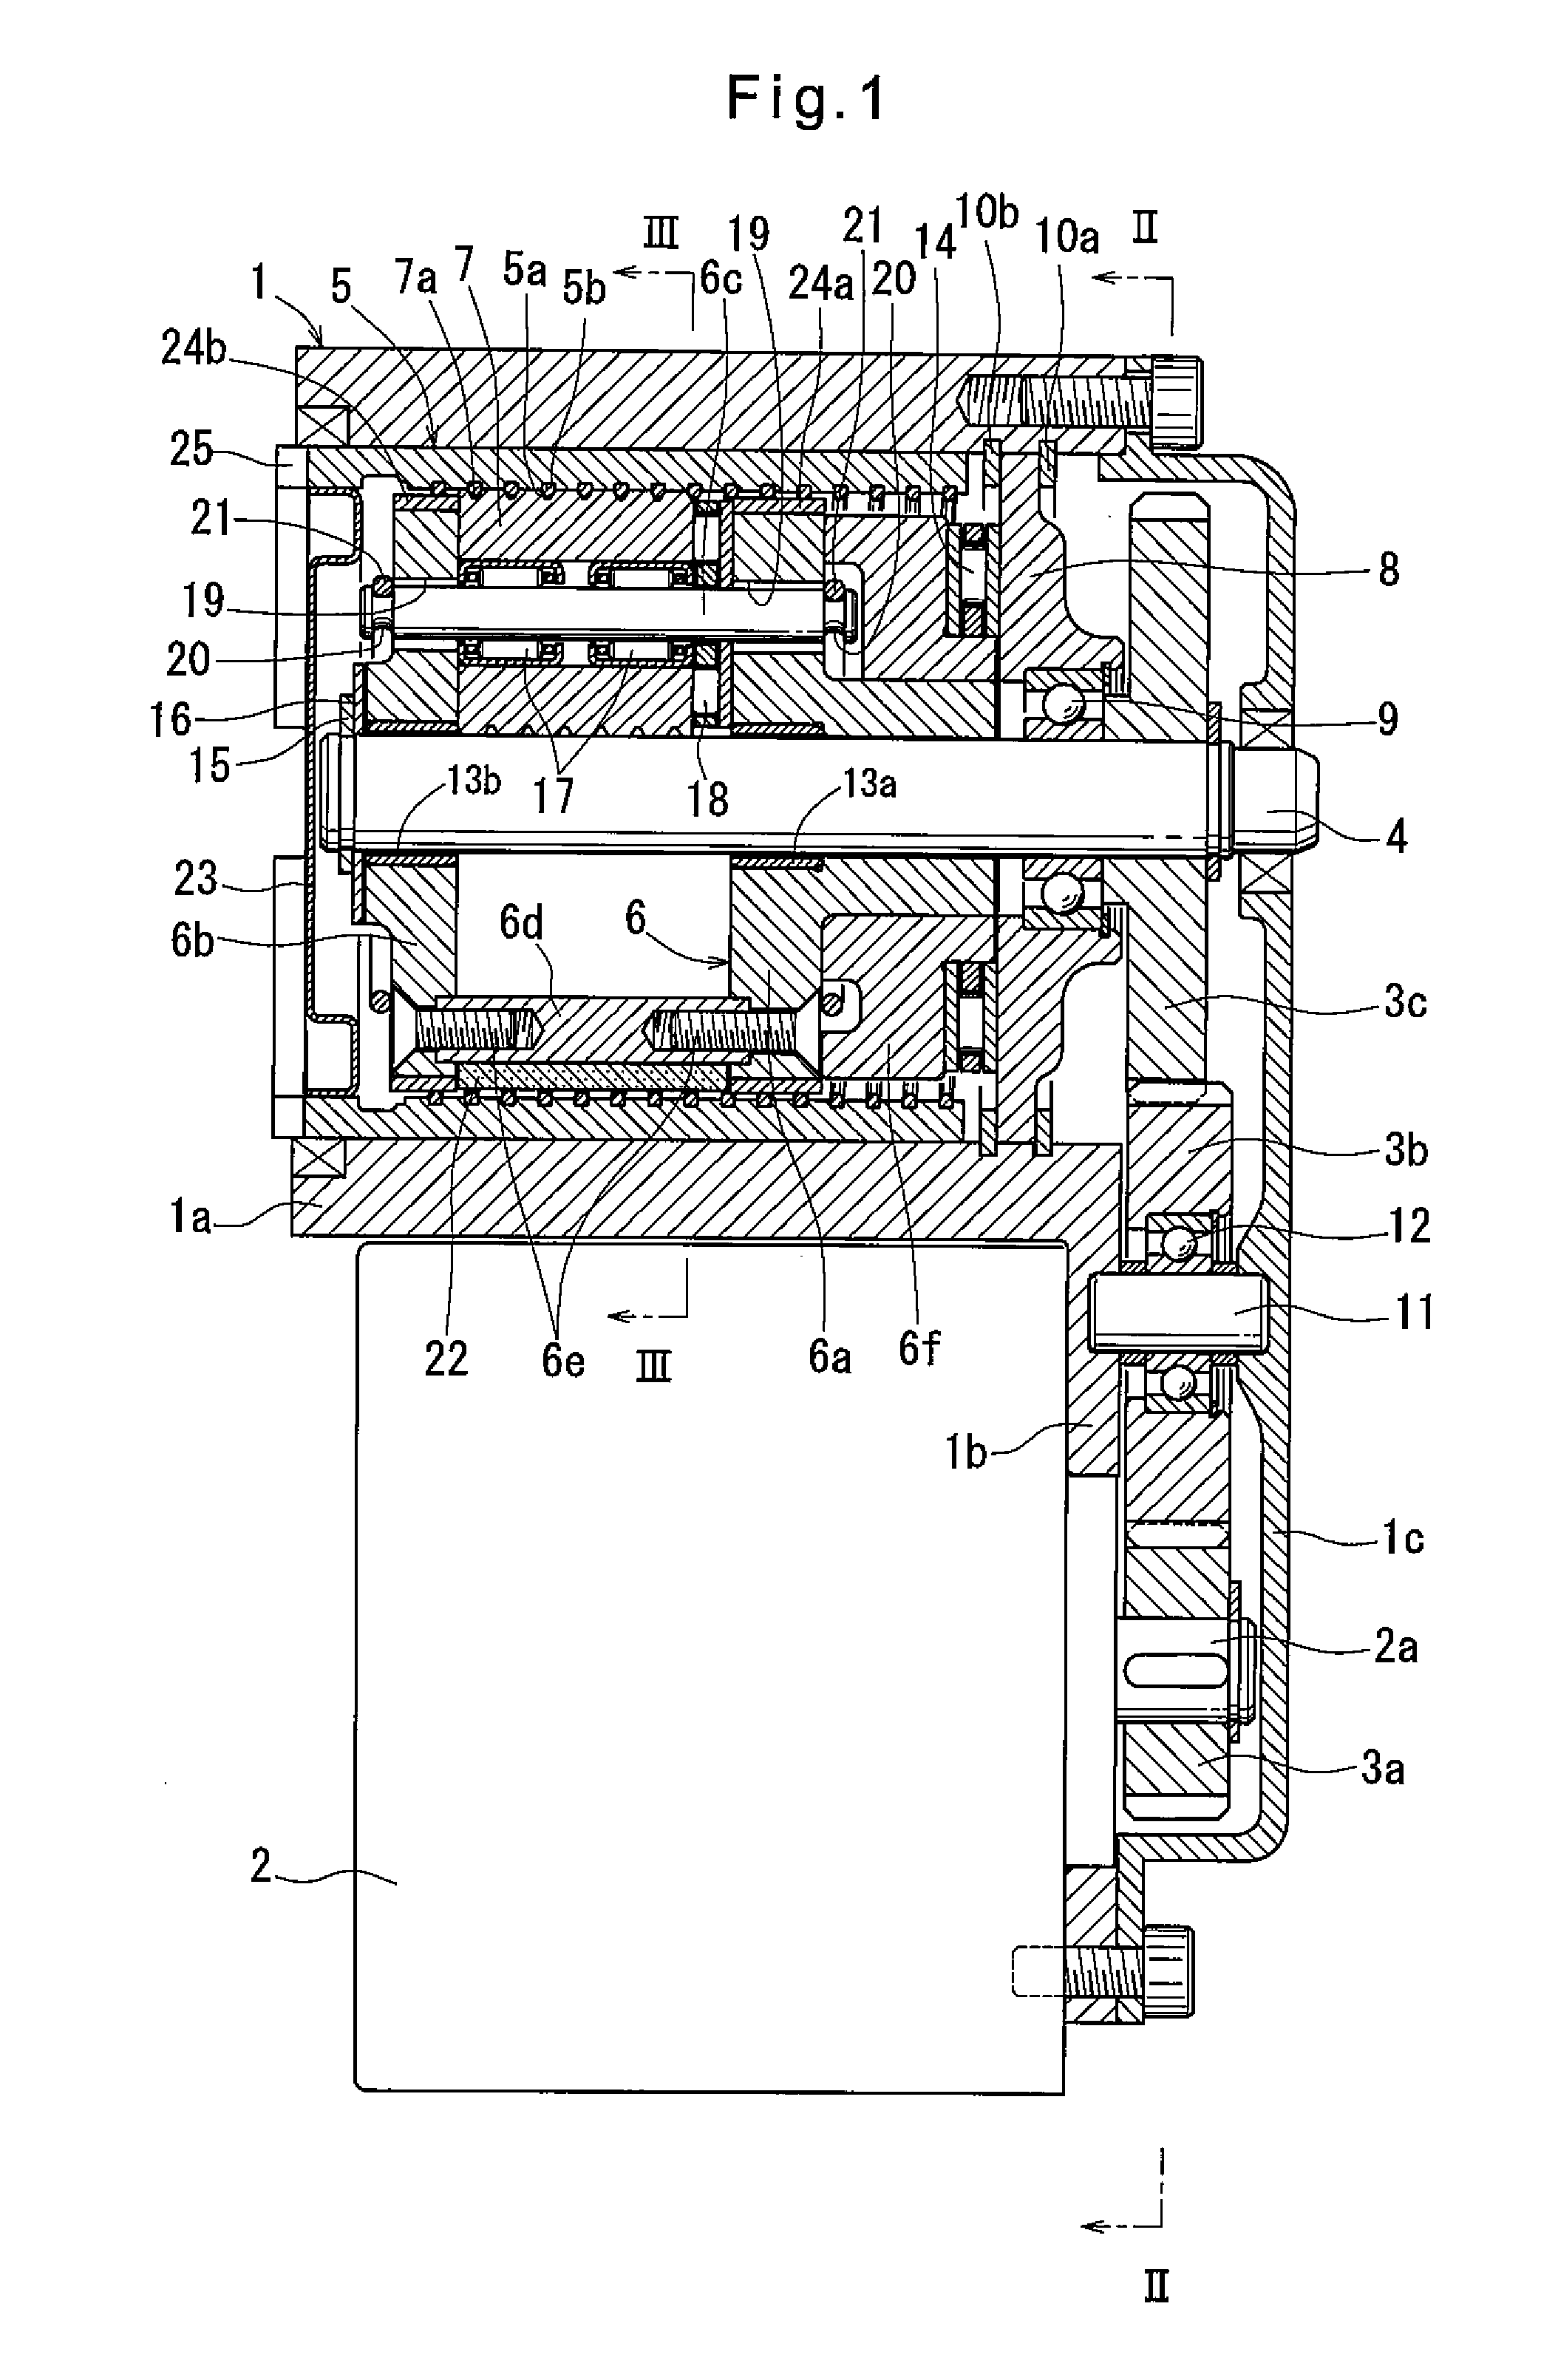 Electric linear motion actuator and electric brake system